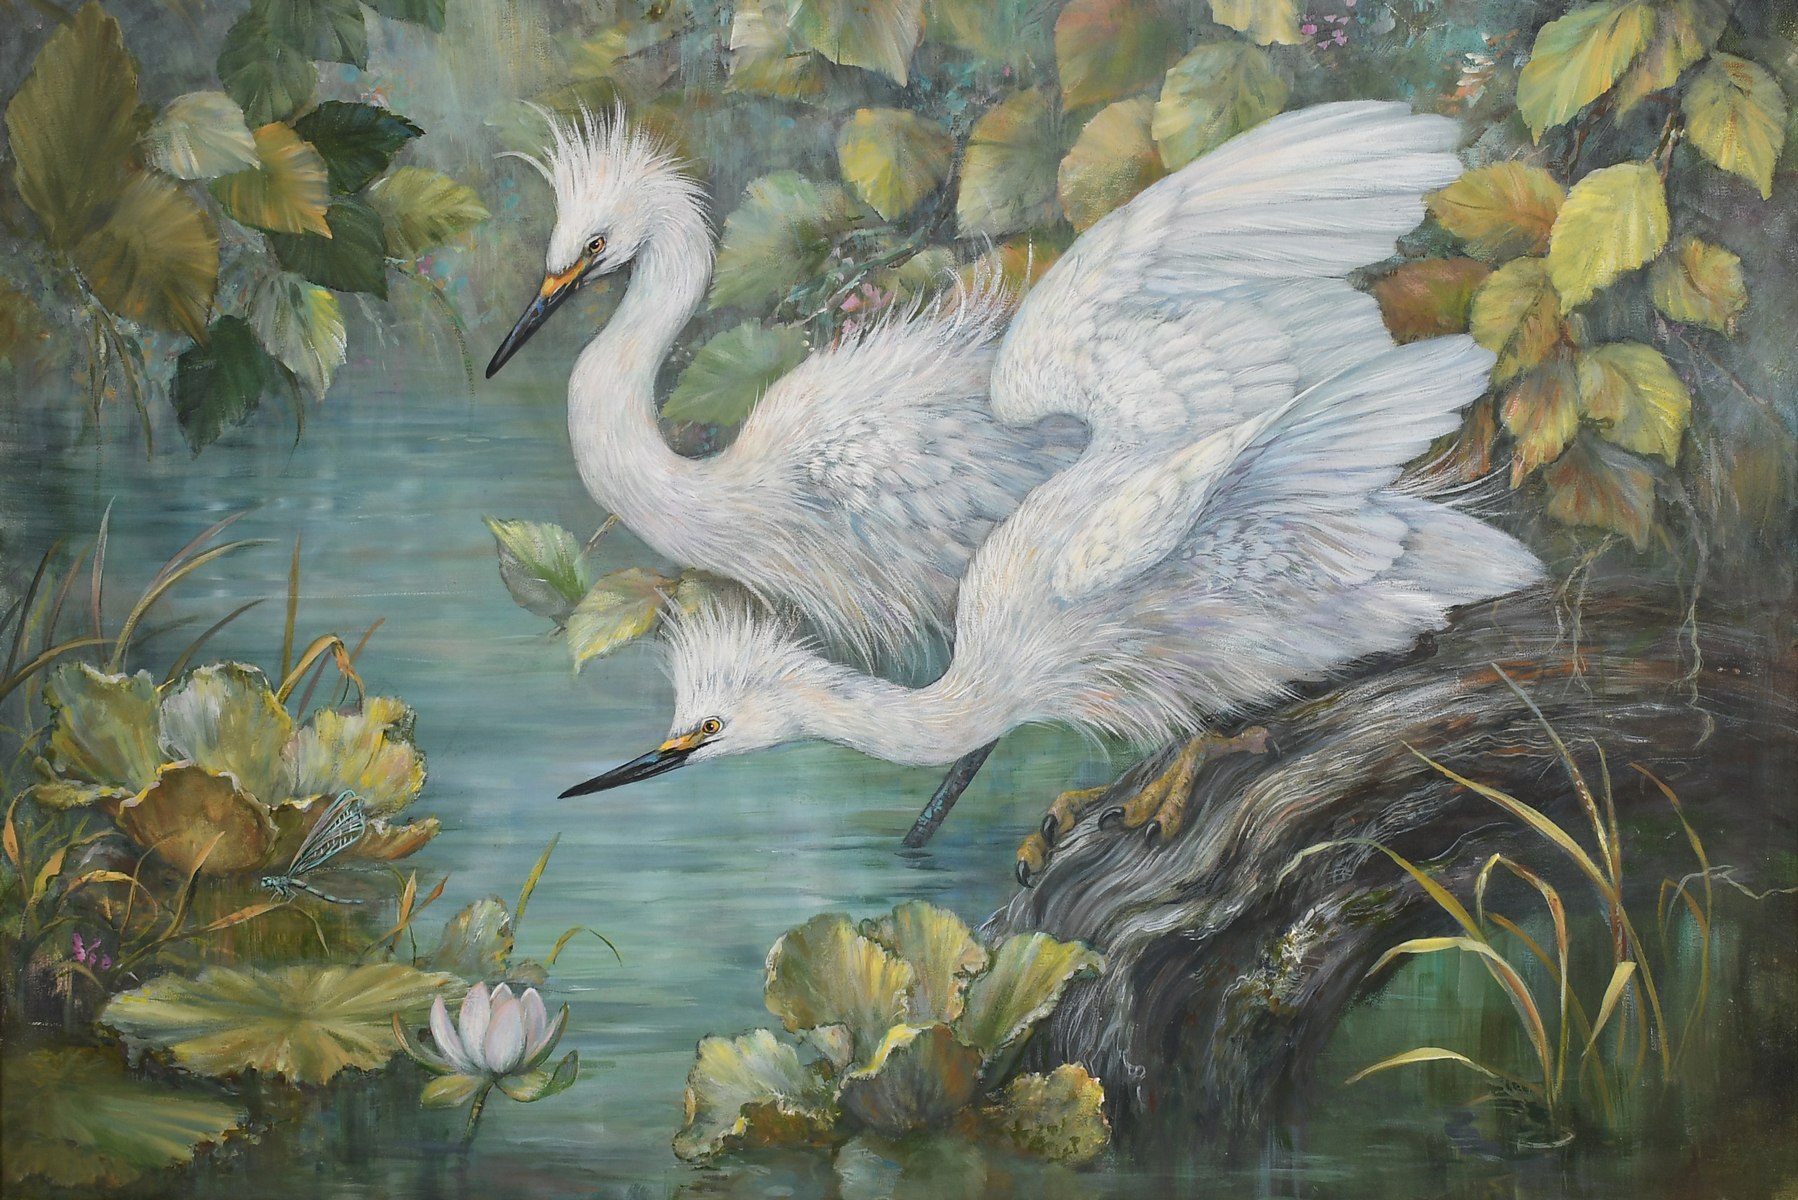 FLORIDA EGRETS PAINTING BY CISCO: